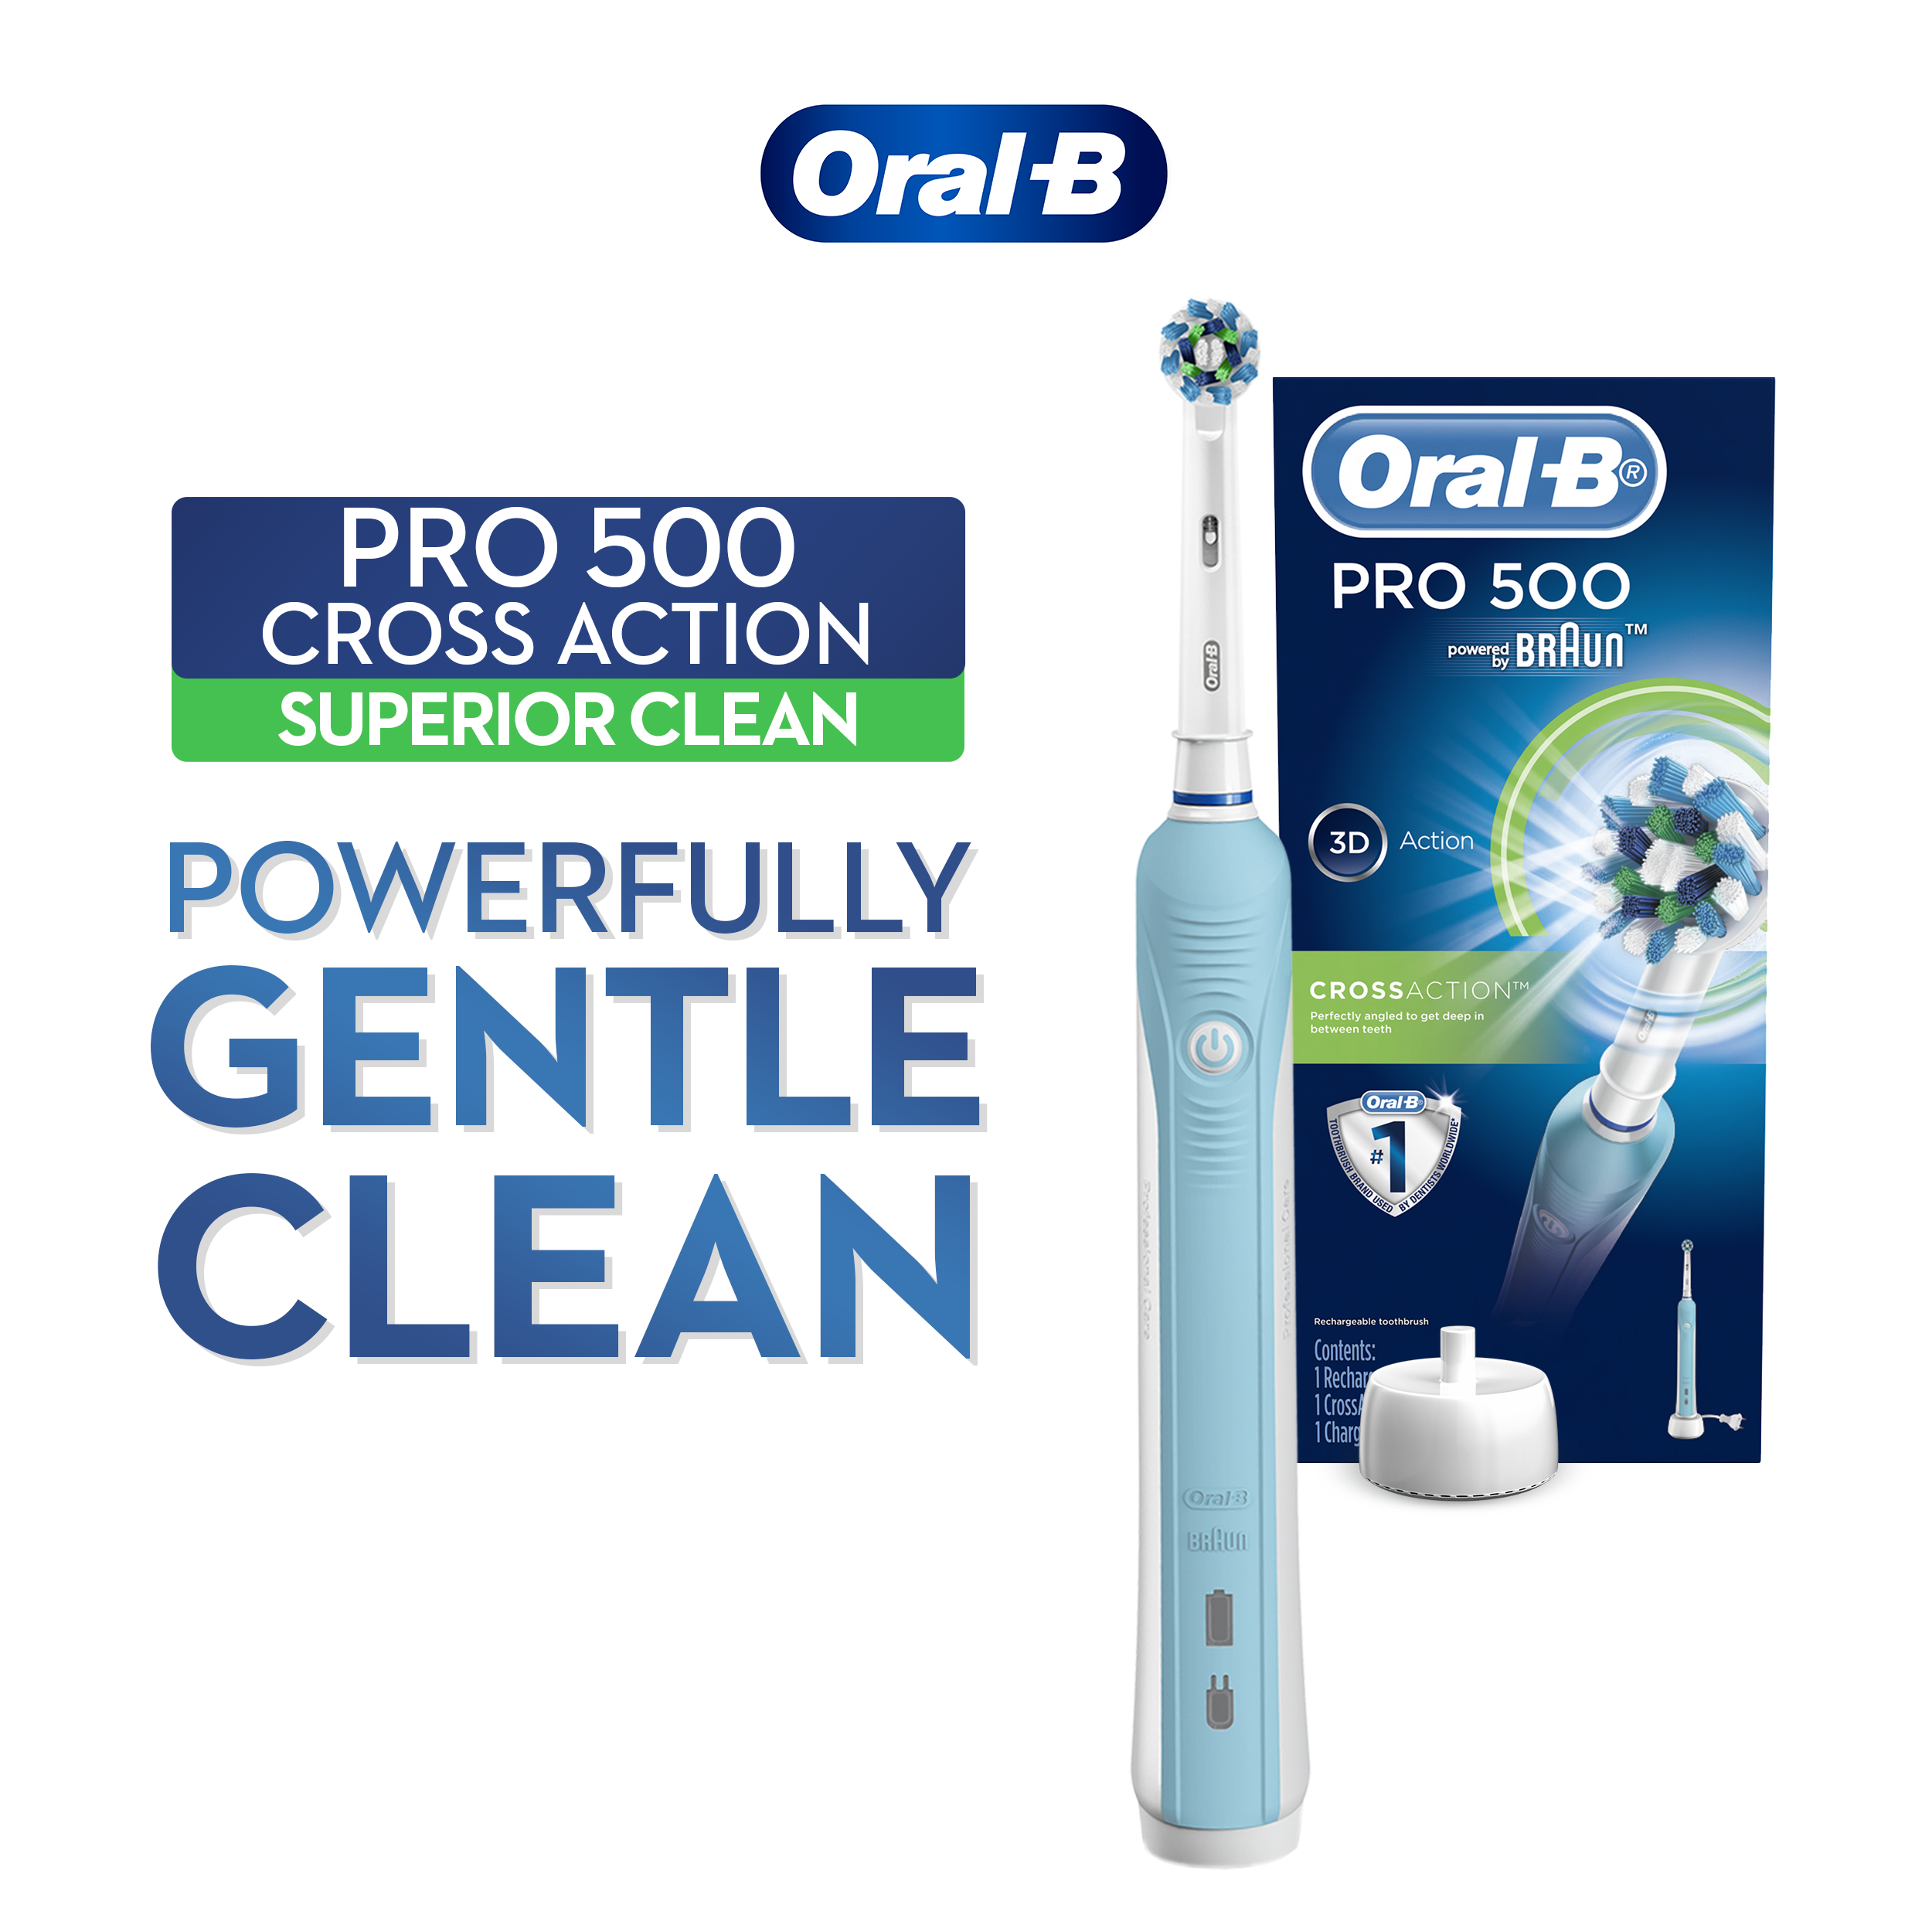 Oral-B Pro 500 CrossAction Electric Toothbrush Powered by Braun